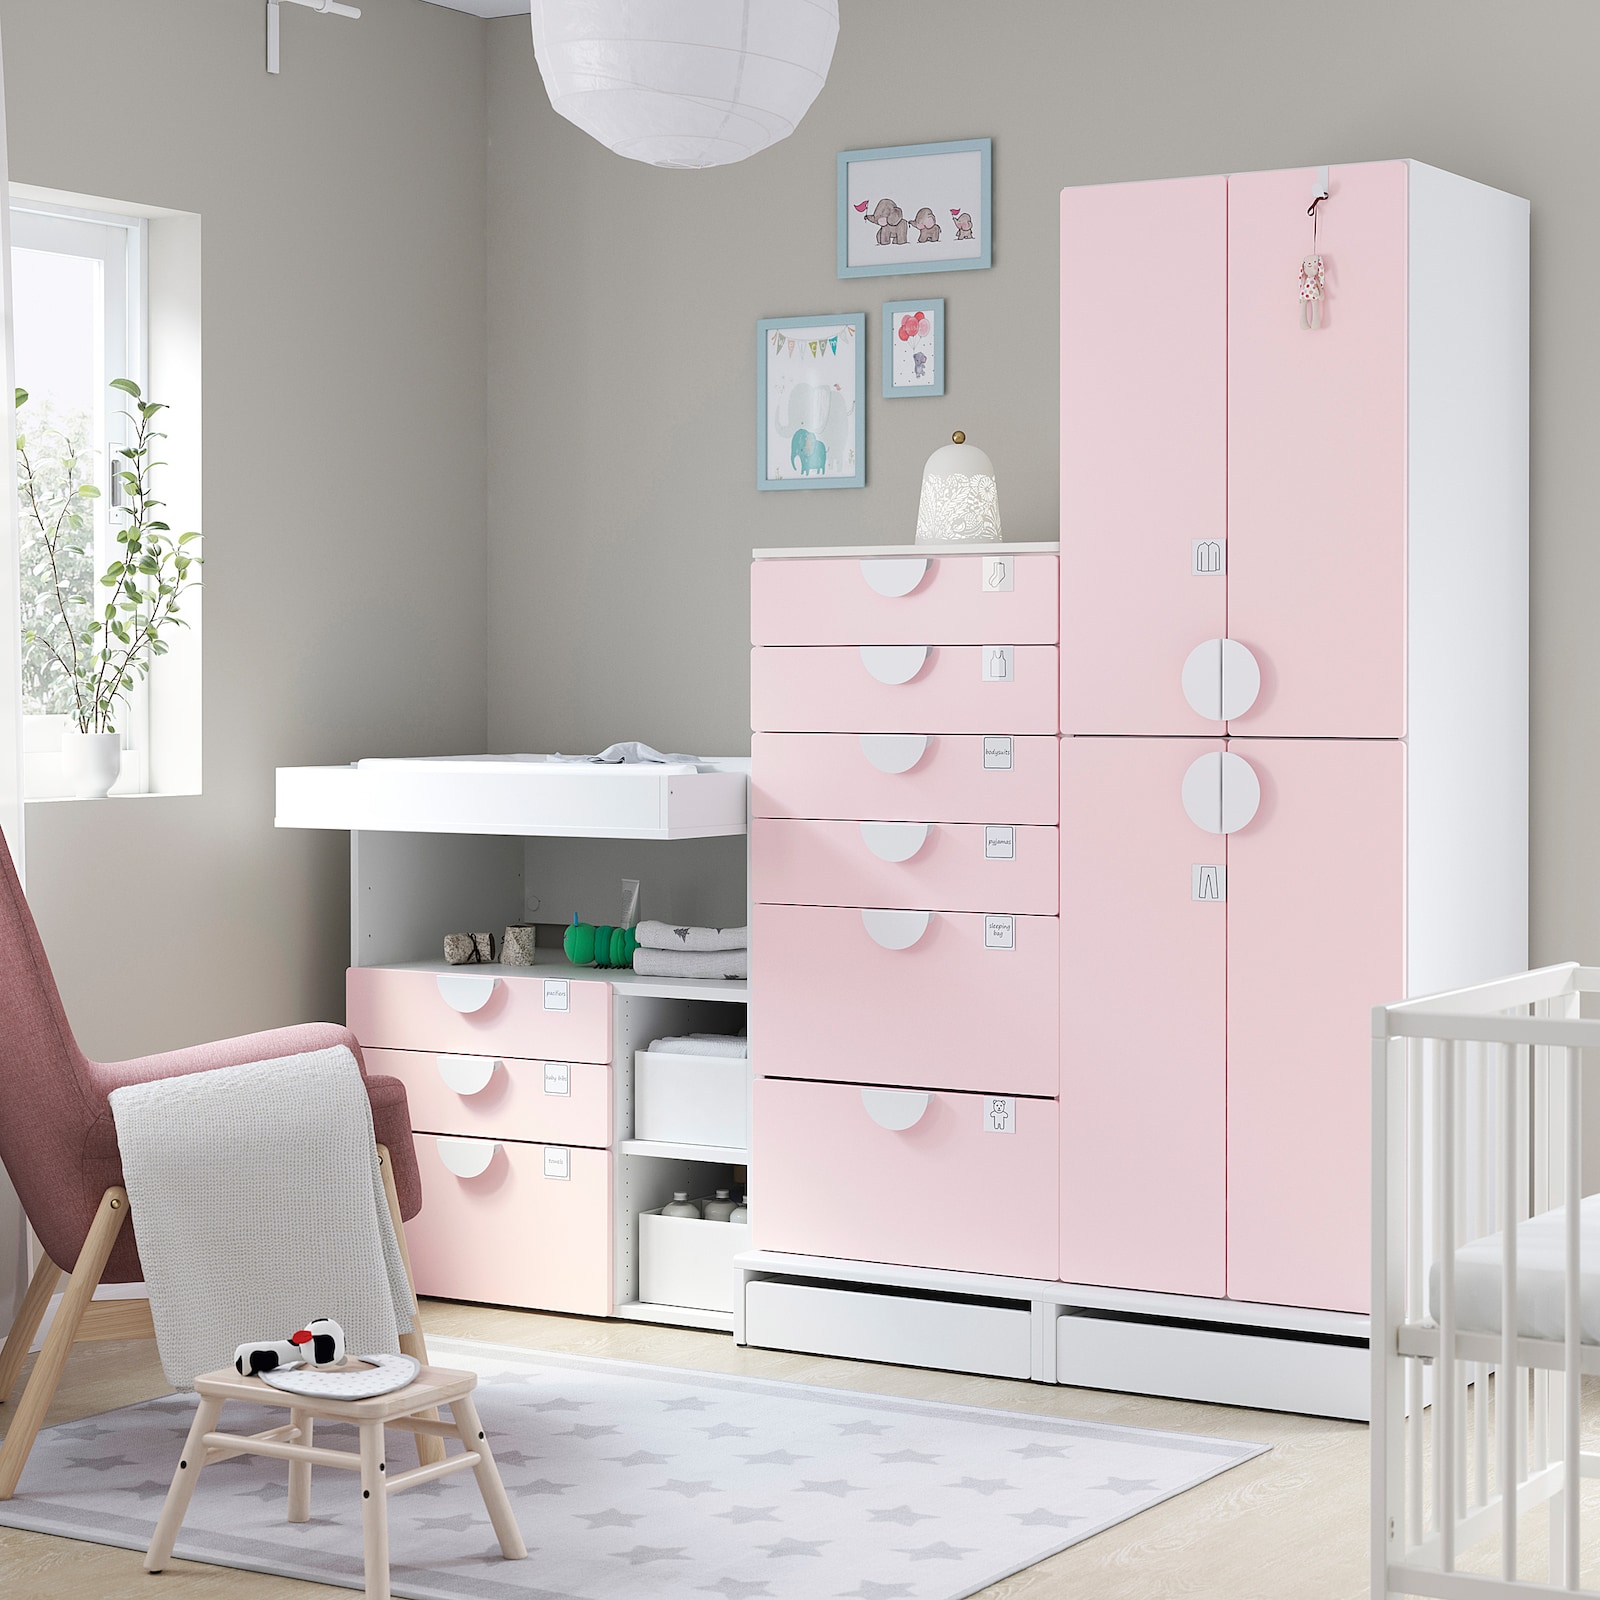 Smastad Uppfoera Storage Combination White Pale Pink With Changing Table  0936004 Pe793055 S5 ?resize=114